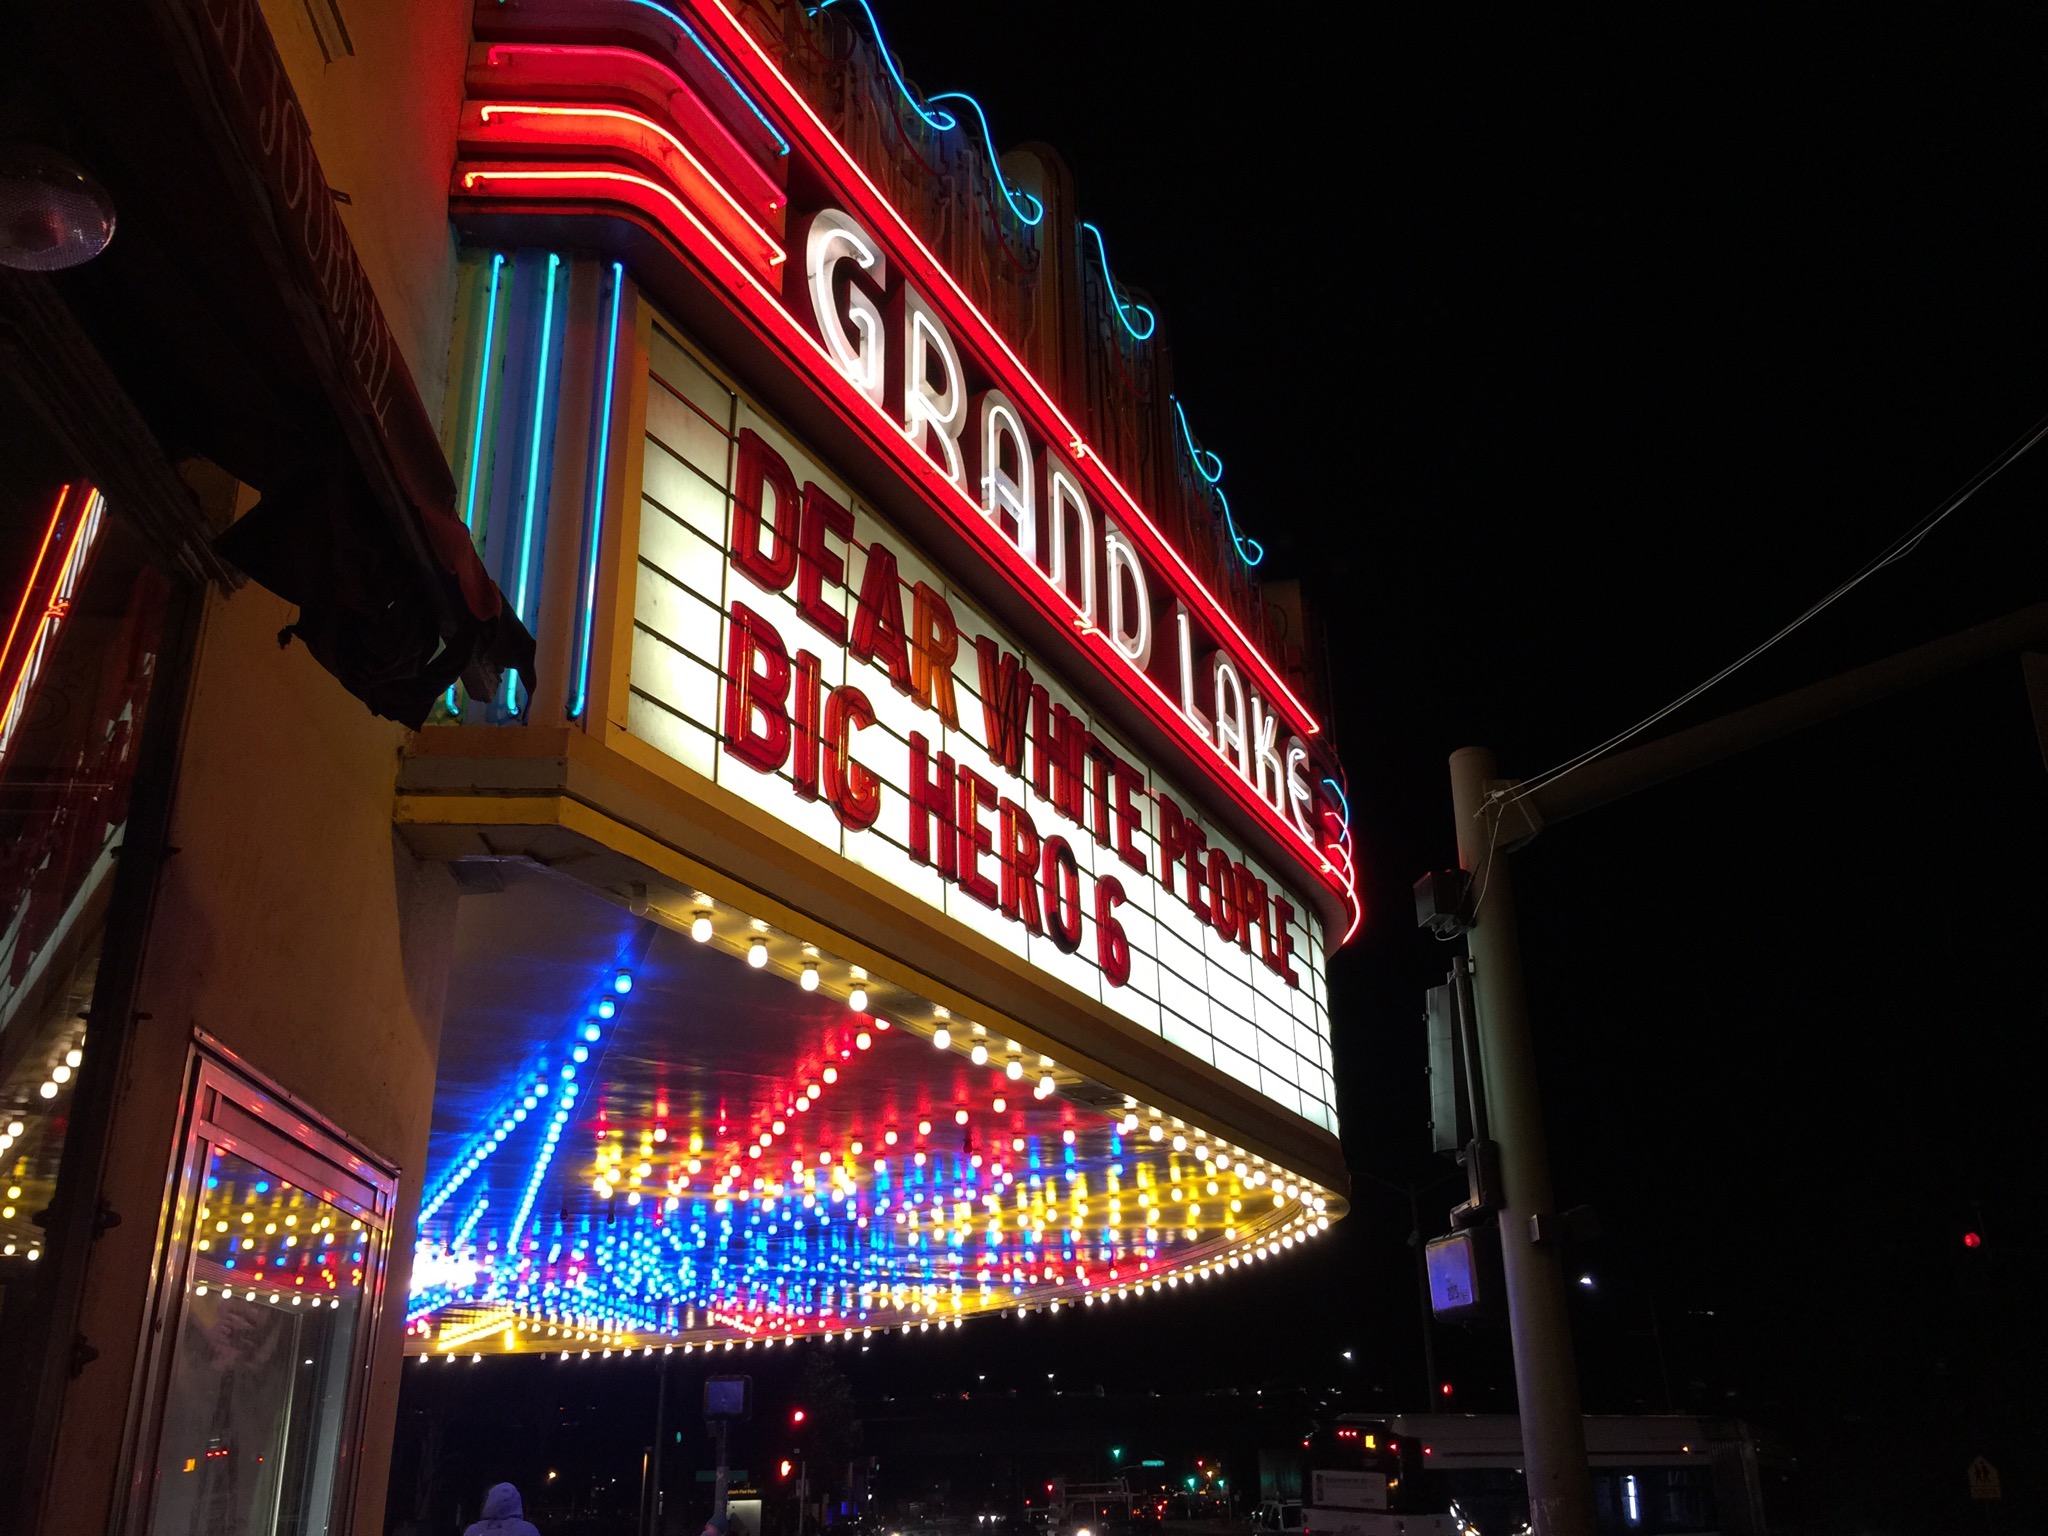 Grand Lake Theater sign, lit up at night